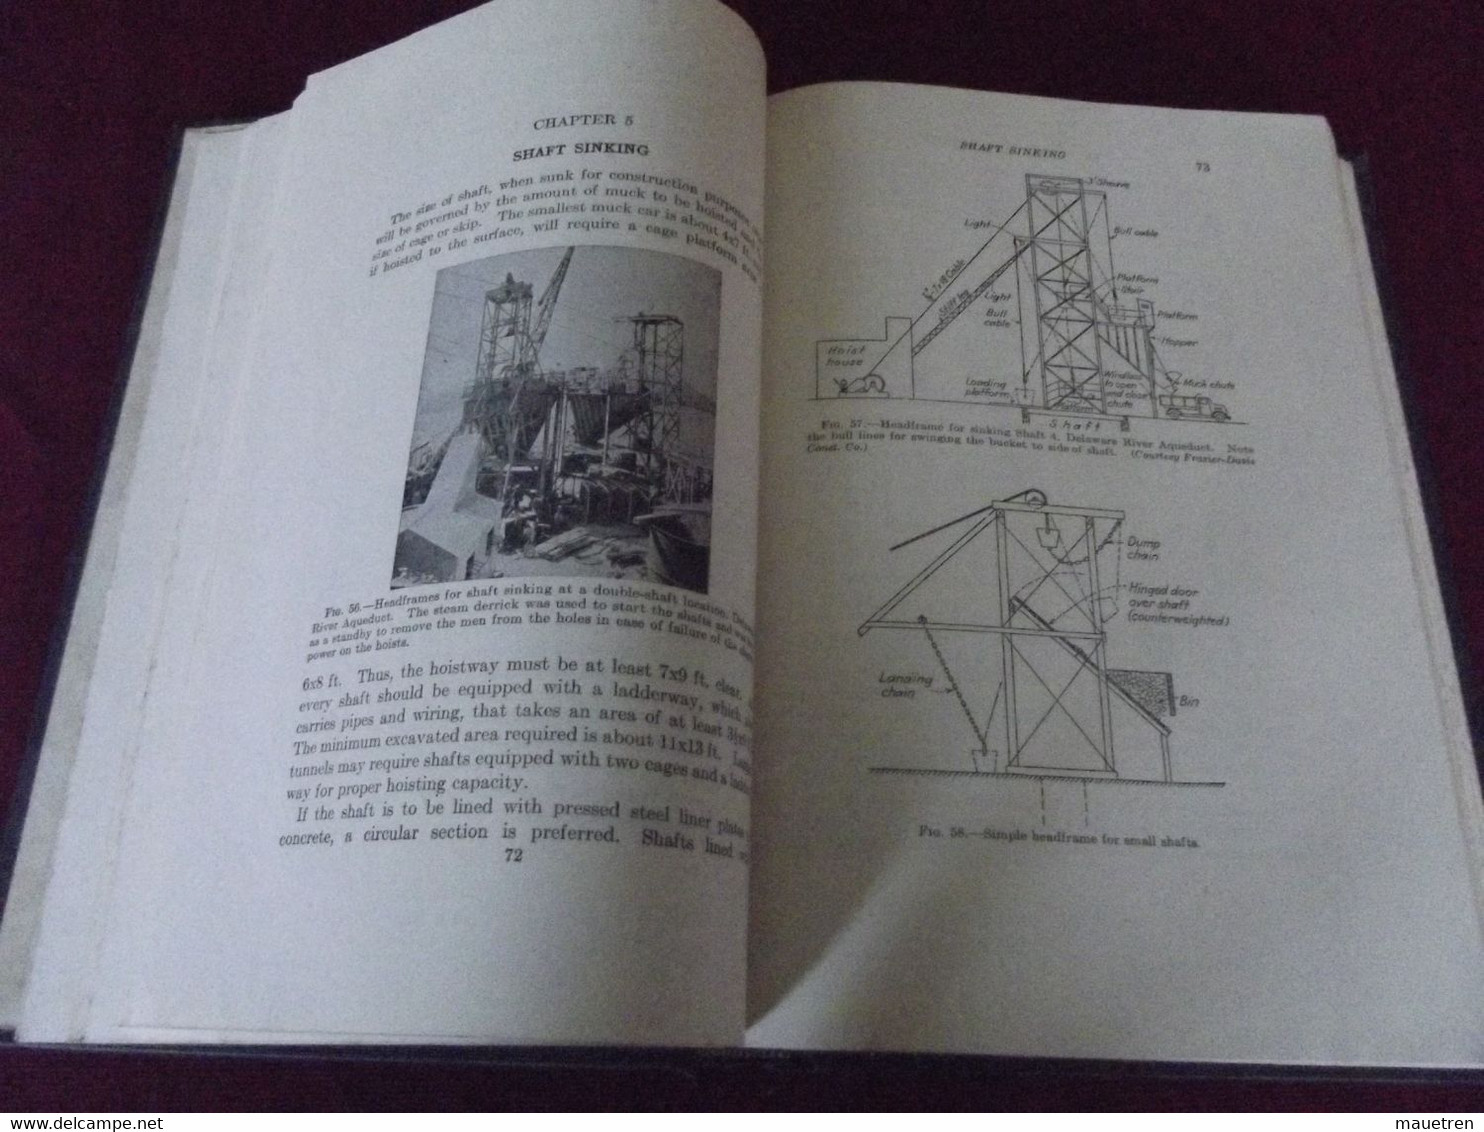 PRACTICAL TUNNEL DRIVING ( Construction Des Tunnels ) Par W. Richdson And Mayo .1941 - Scienze